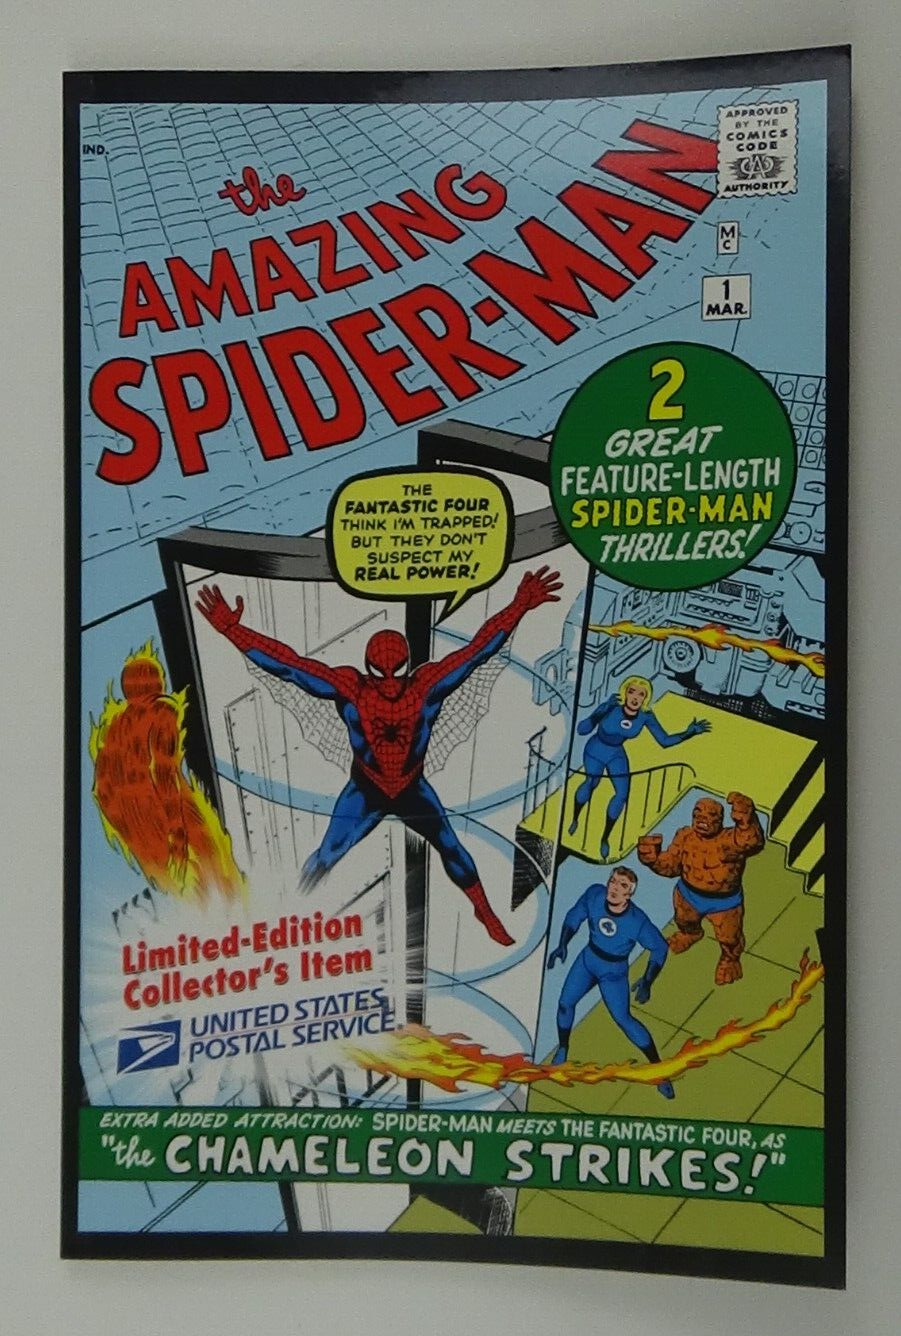 The Amazing Spider-Man #1 Post Office Promo (USPS Marvel, 2007)  #019-30